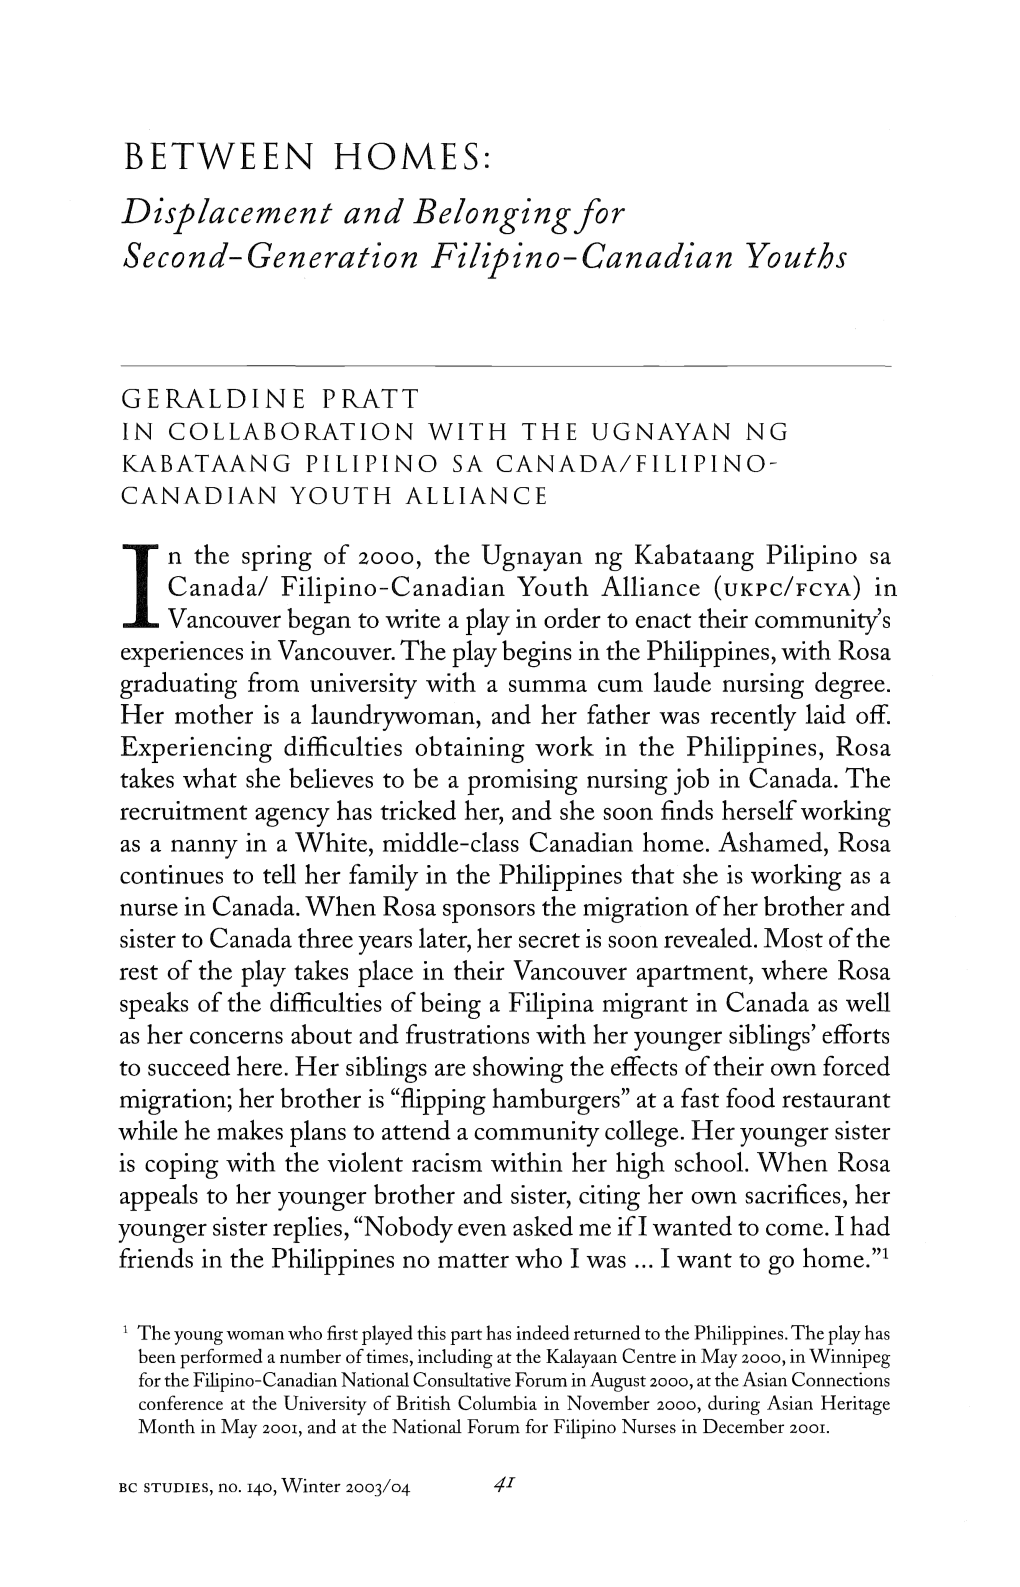 Displacement and Belonging for Second-Generation Filipino-Canadian Youths